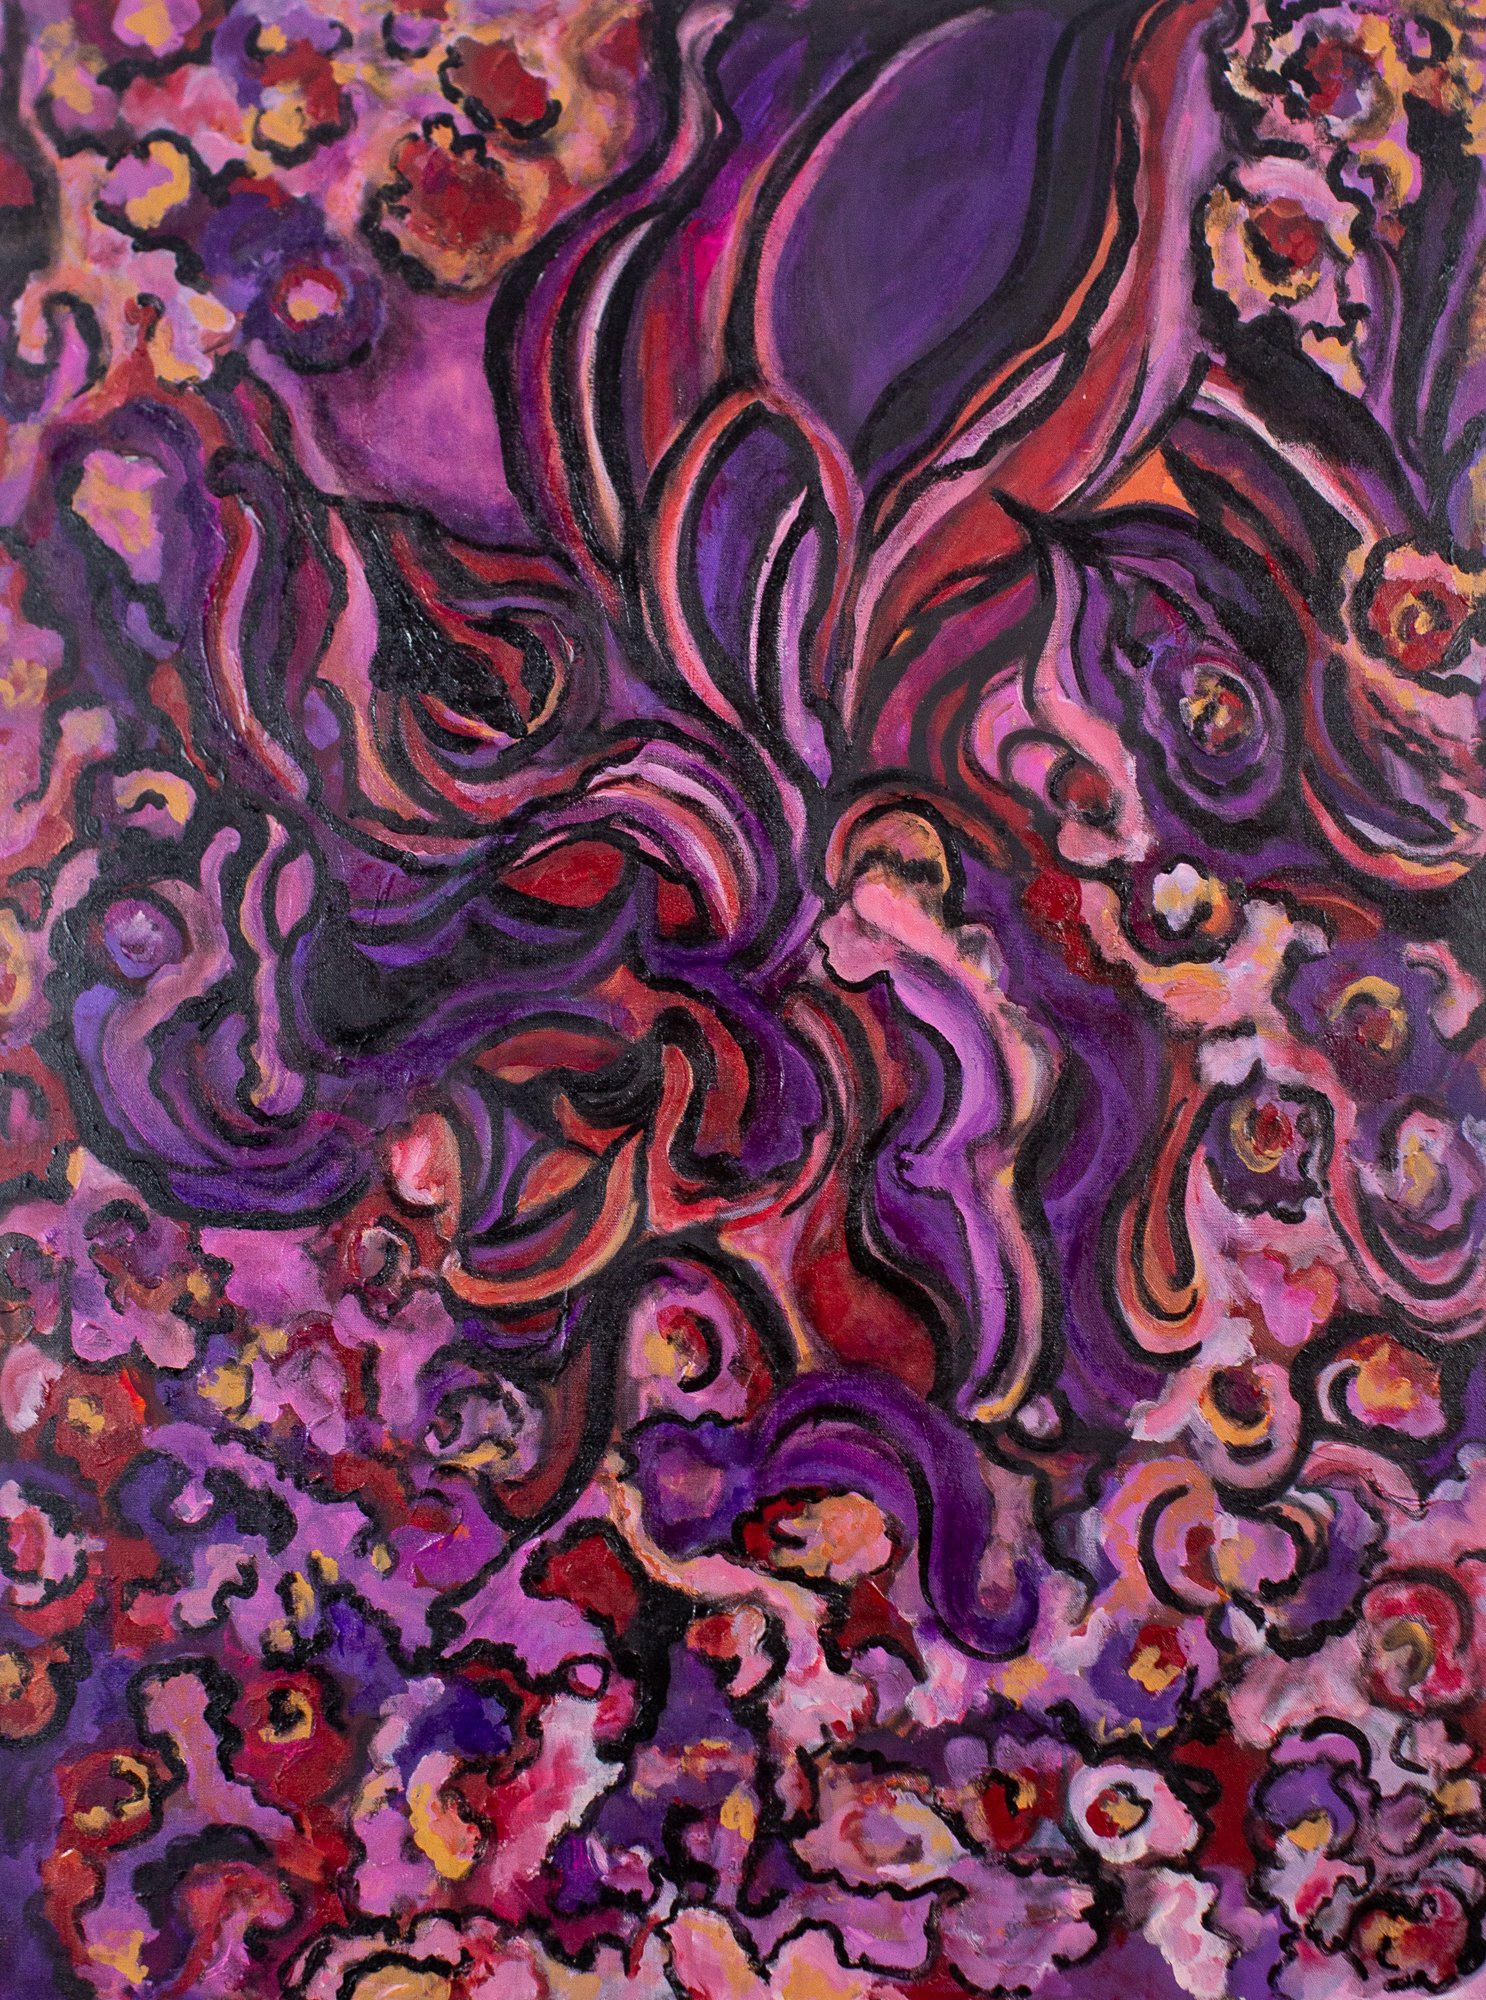  “Love is in the Air” 48" x 36" x 2.0"; Assemblage $2500. Purple and its various hues carries a wide variety of emotions and life status. My father, a retired Heavyweight Boxer, became a wrestler. As the villian, he wore a bright purple wool costume 